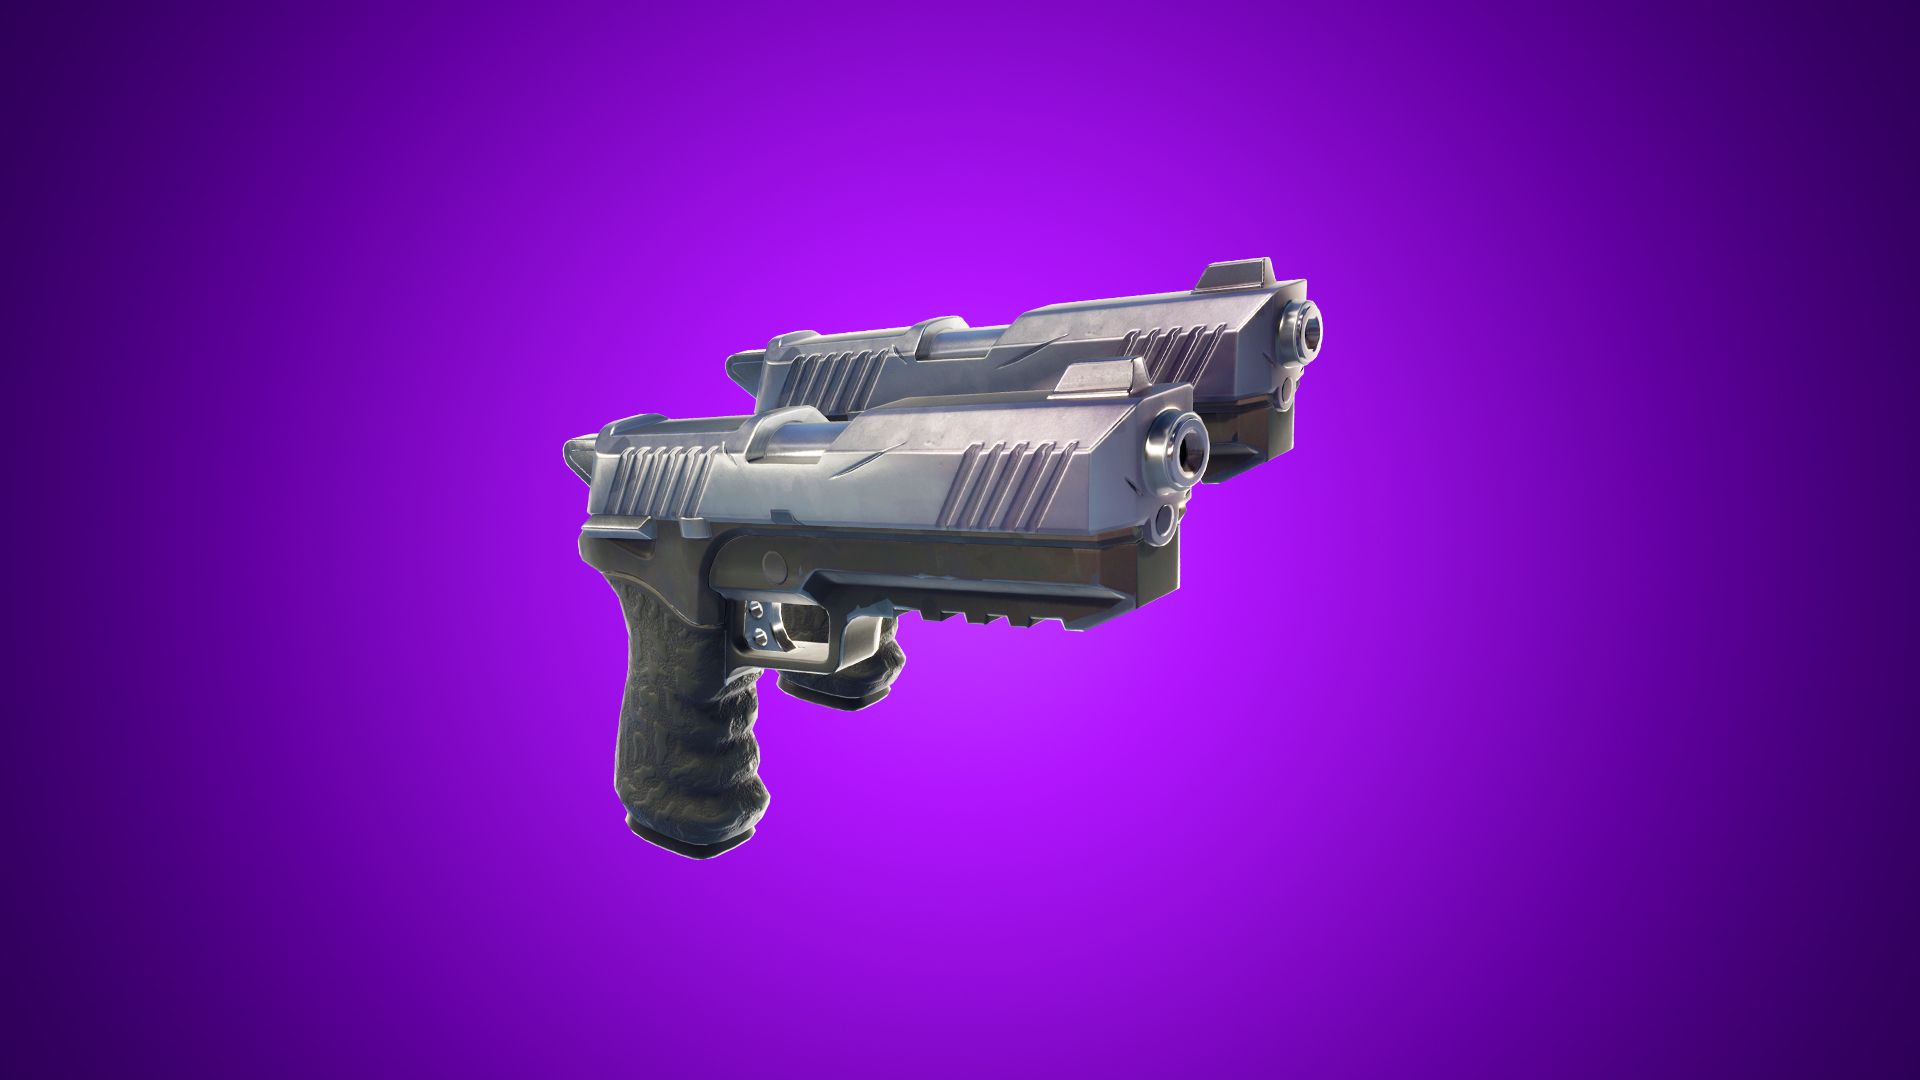 Dual Pistols Returning, Boom Box Nerf And More In Tuesday's Fortnite v7.10 Content Update #3